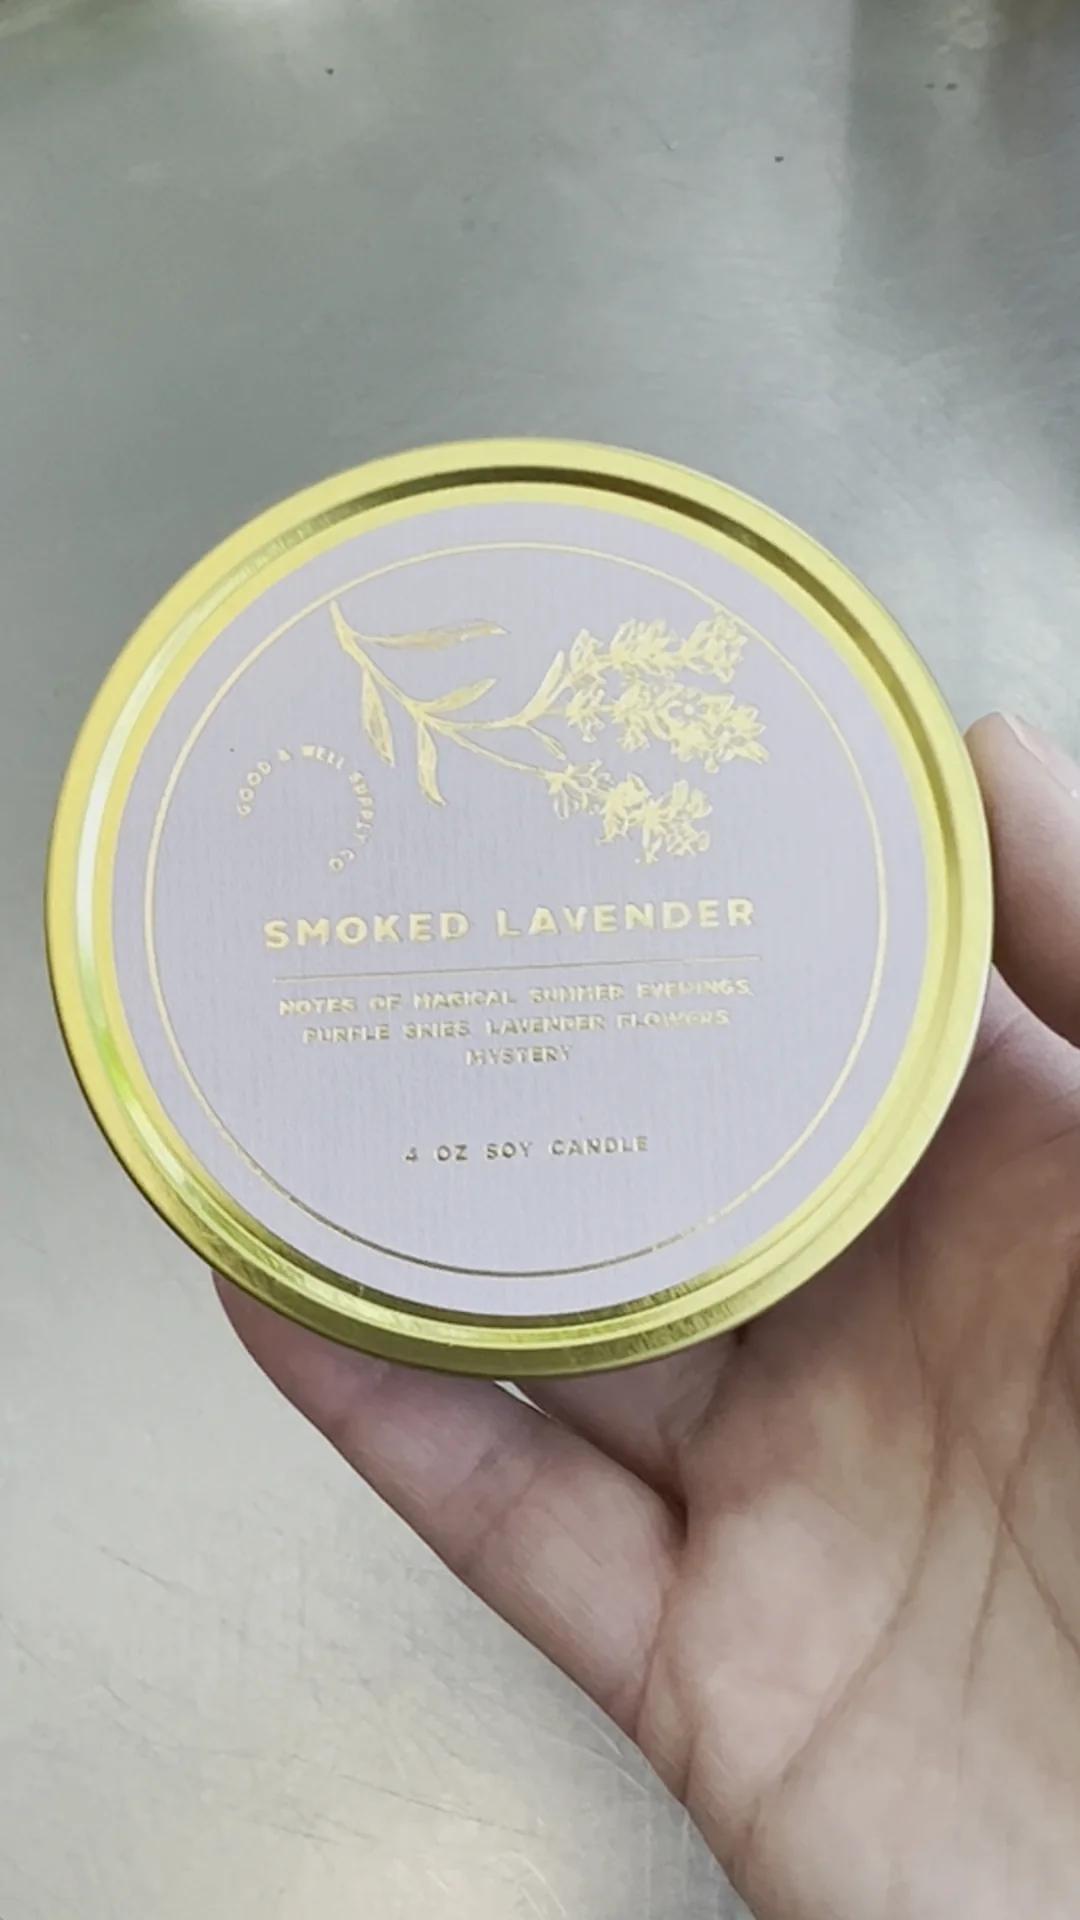 smoked lavender candle - What are the benefits of burning lavender candles